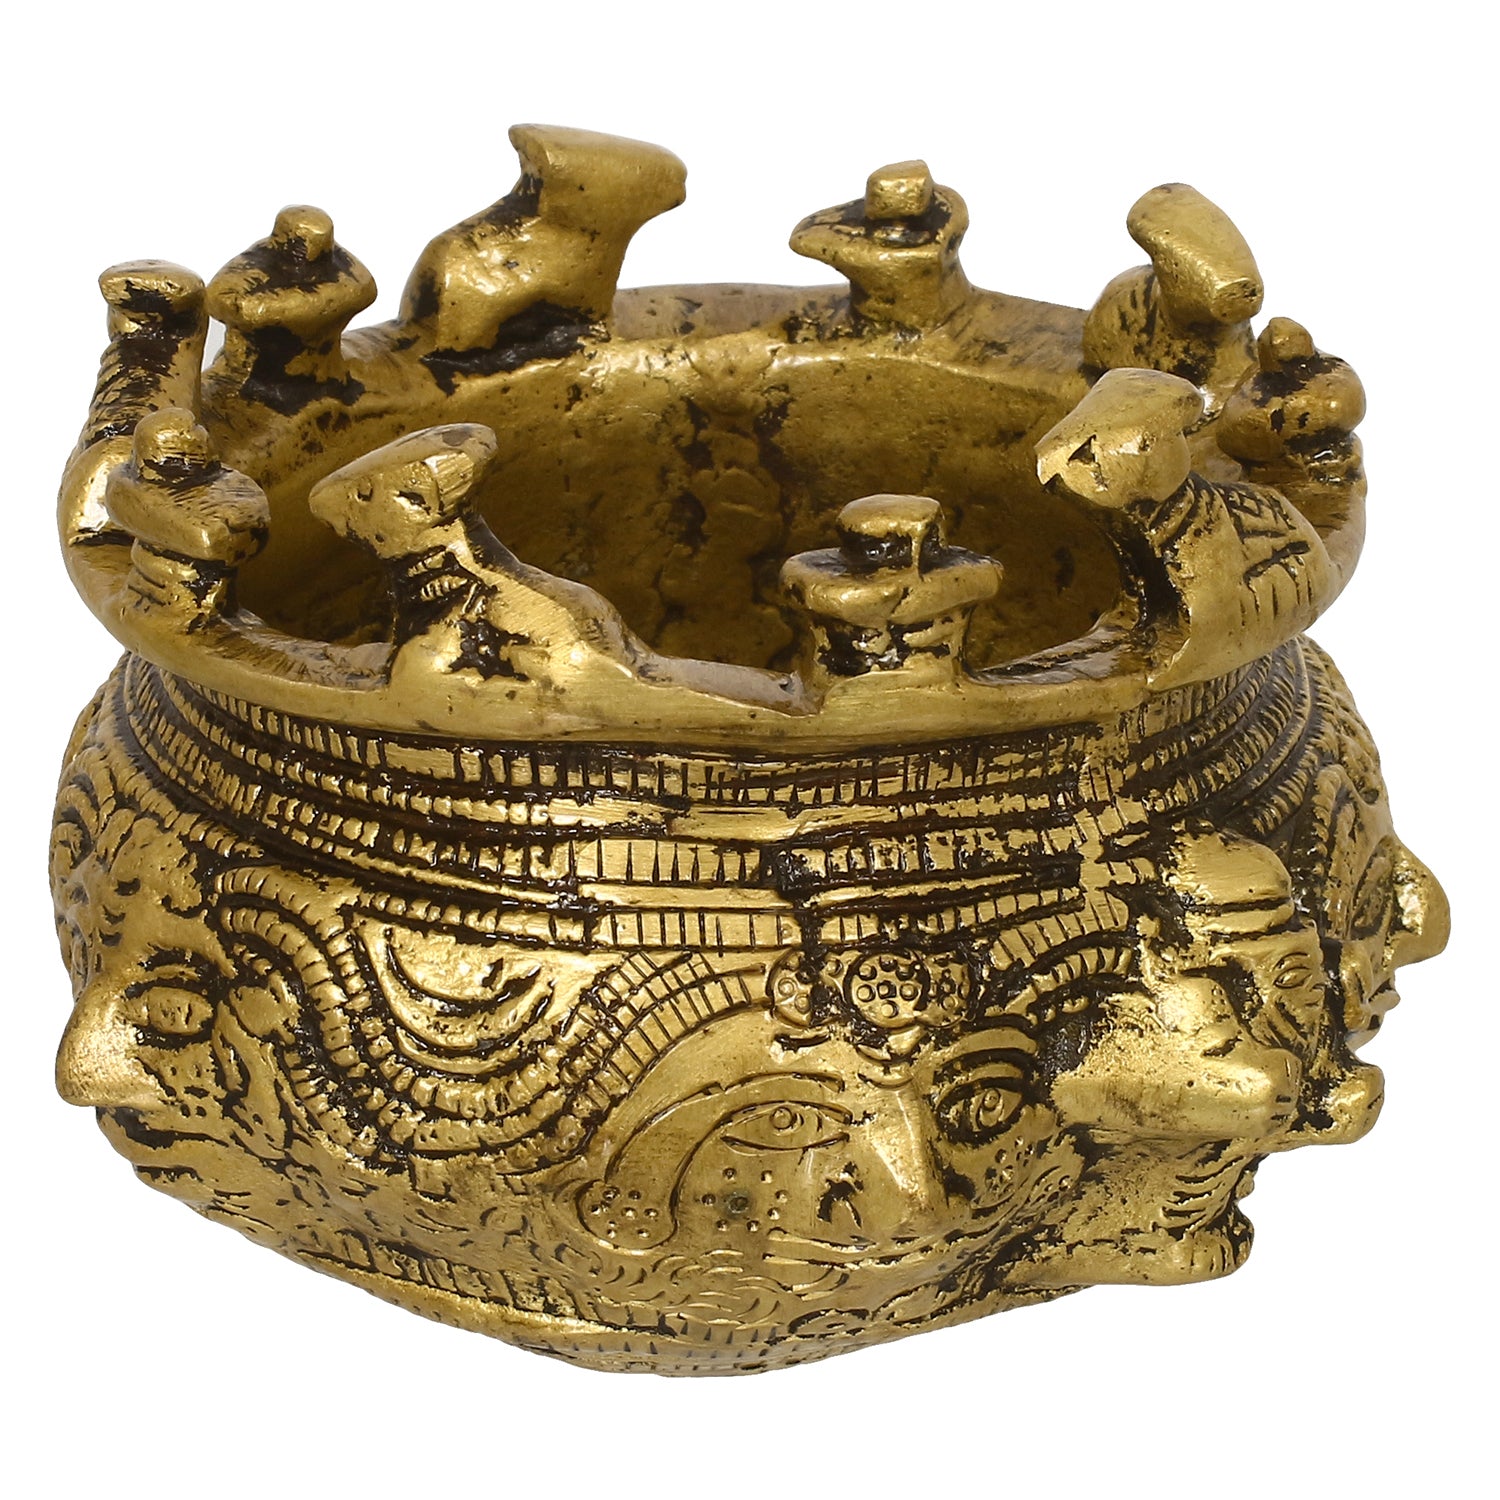 Golden Brass Auspicious Kalash, Shivling And Nandi On The Rim Of The Kalash/Pot For Religious Offerings 6